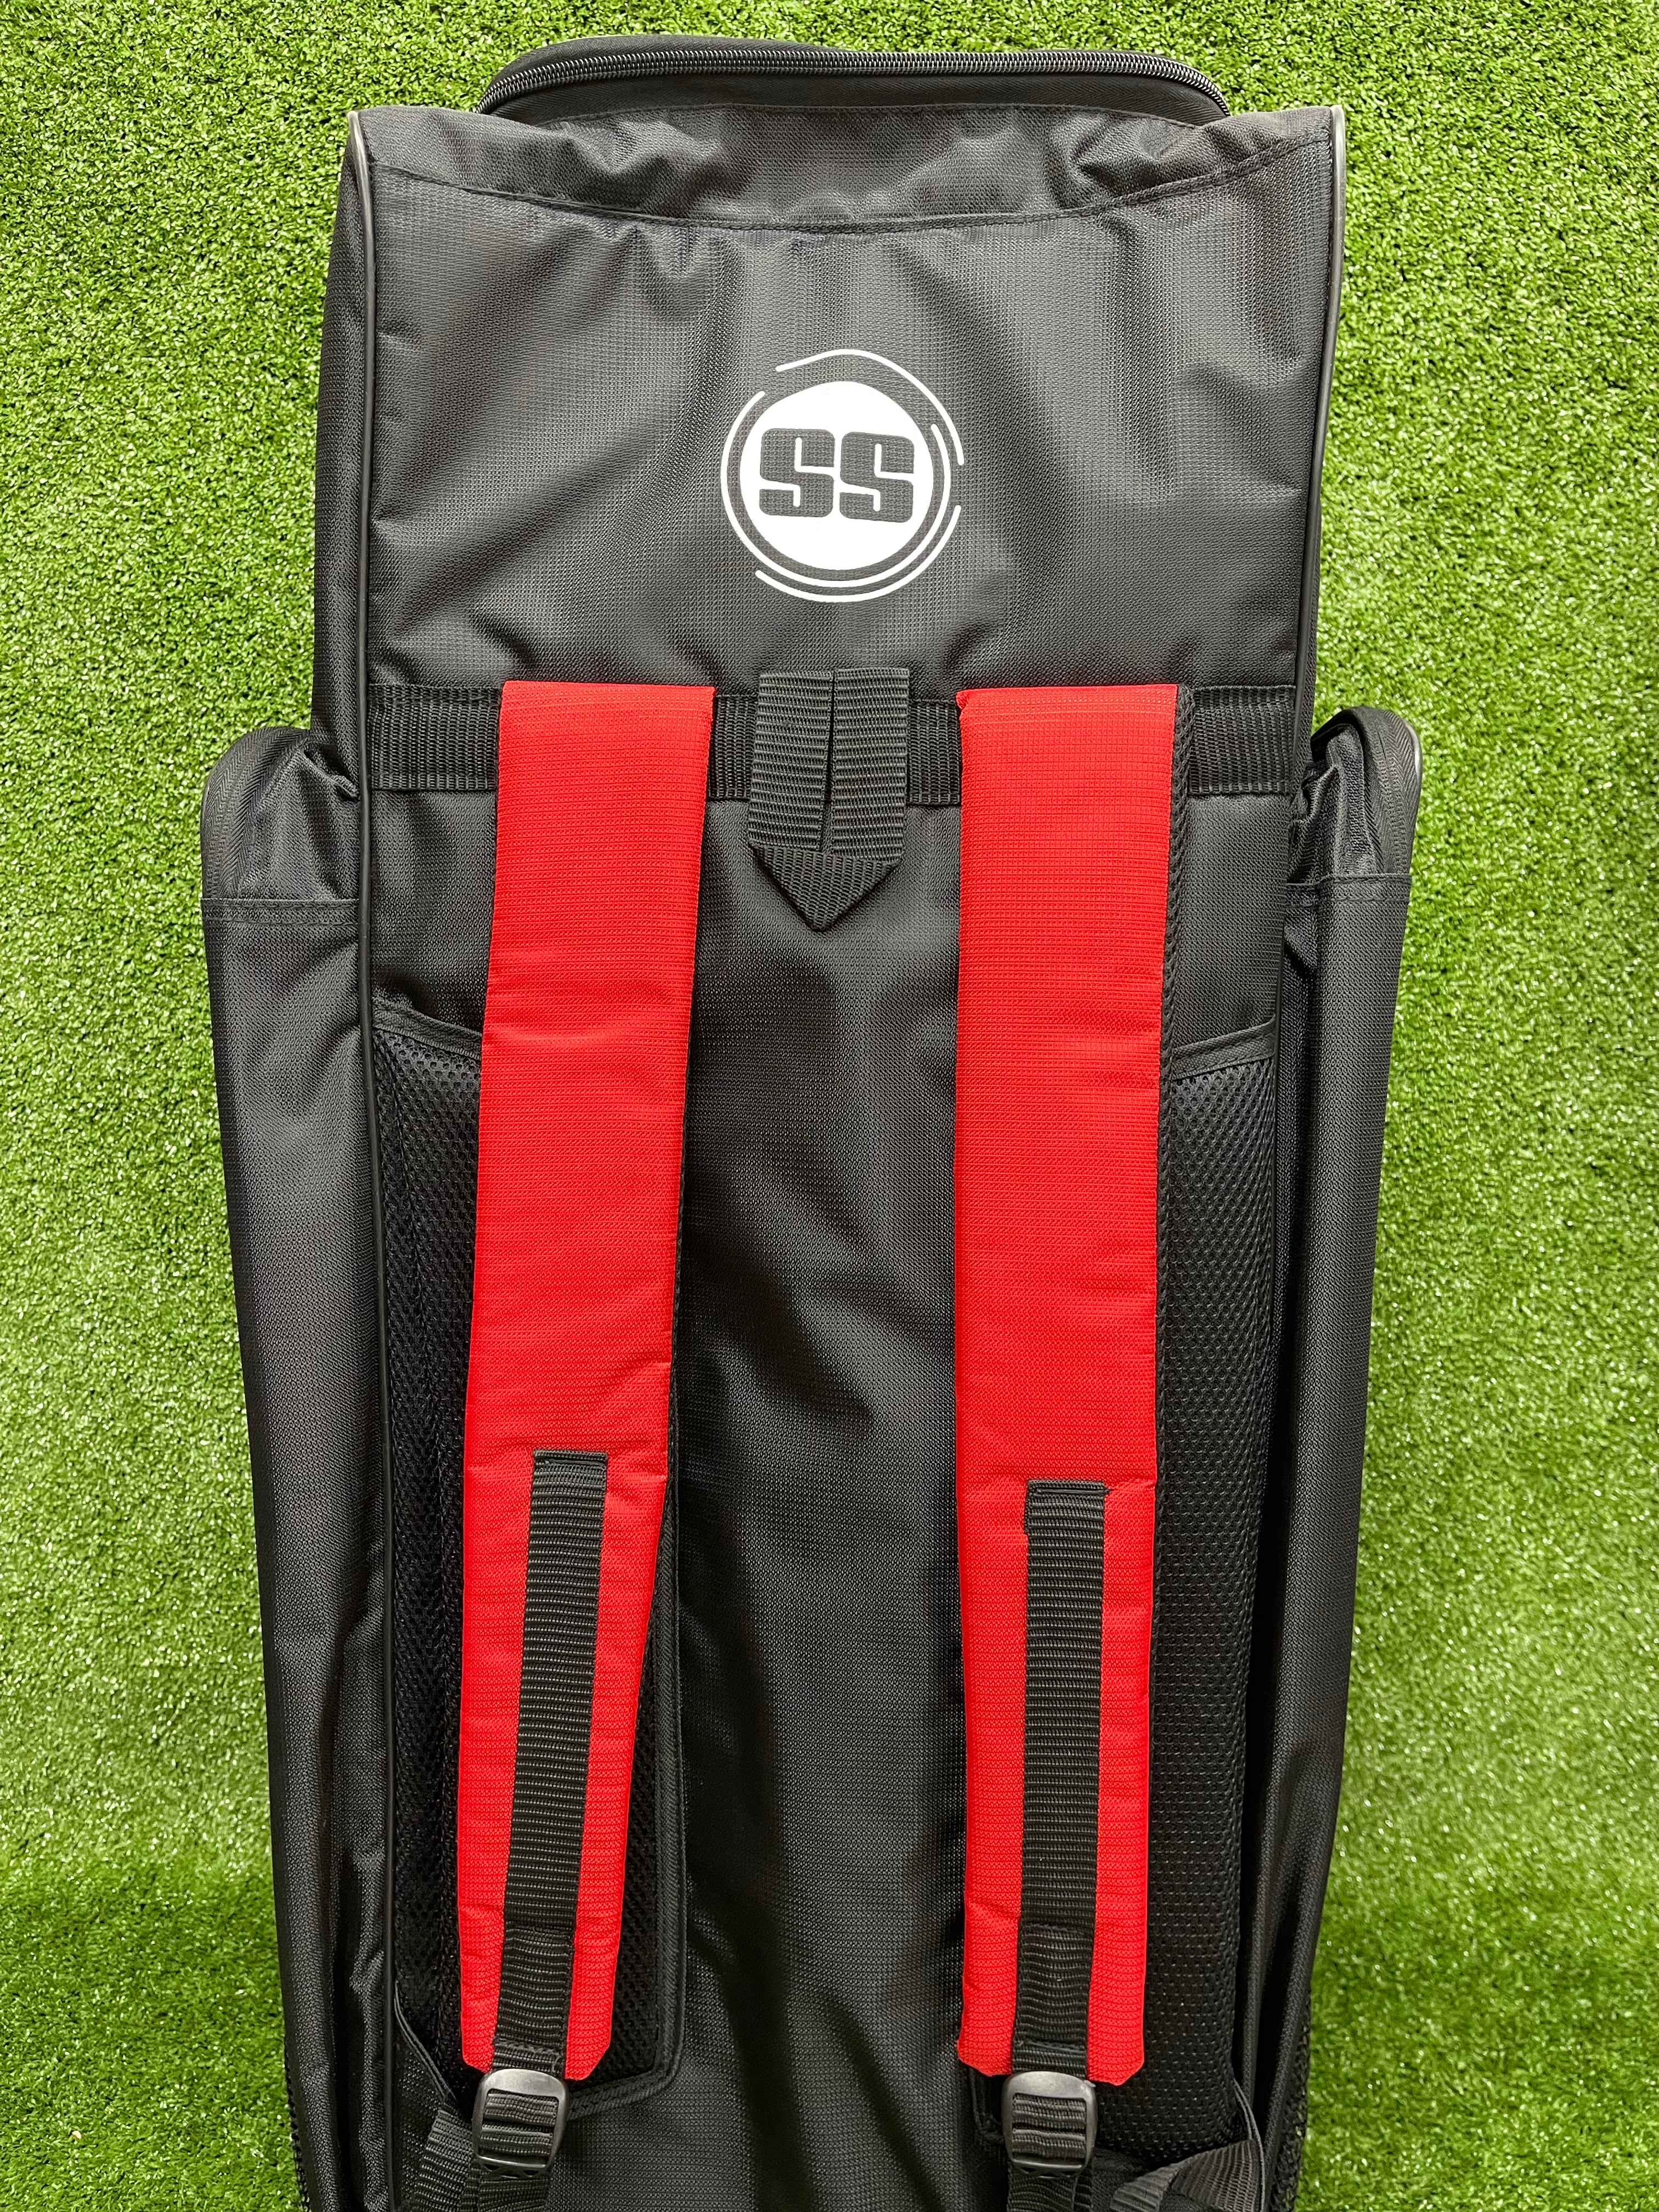 SS World Cup T20 Duffle Cricket Kit Bag – StarSportsUS